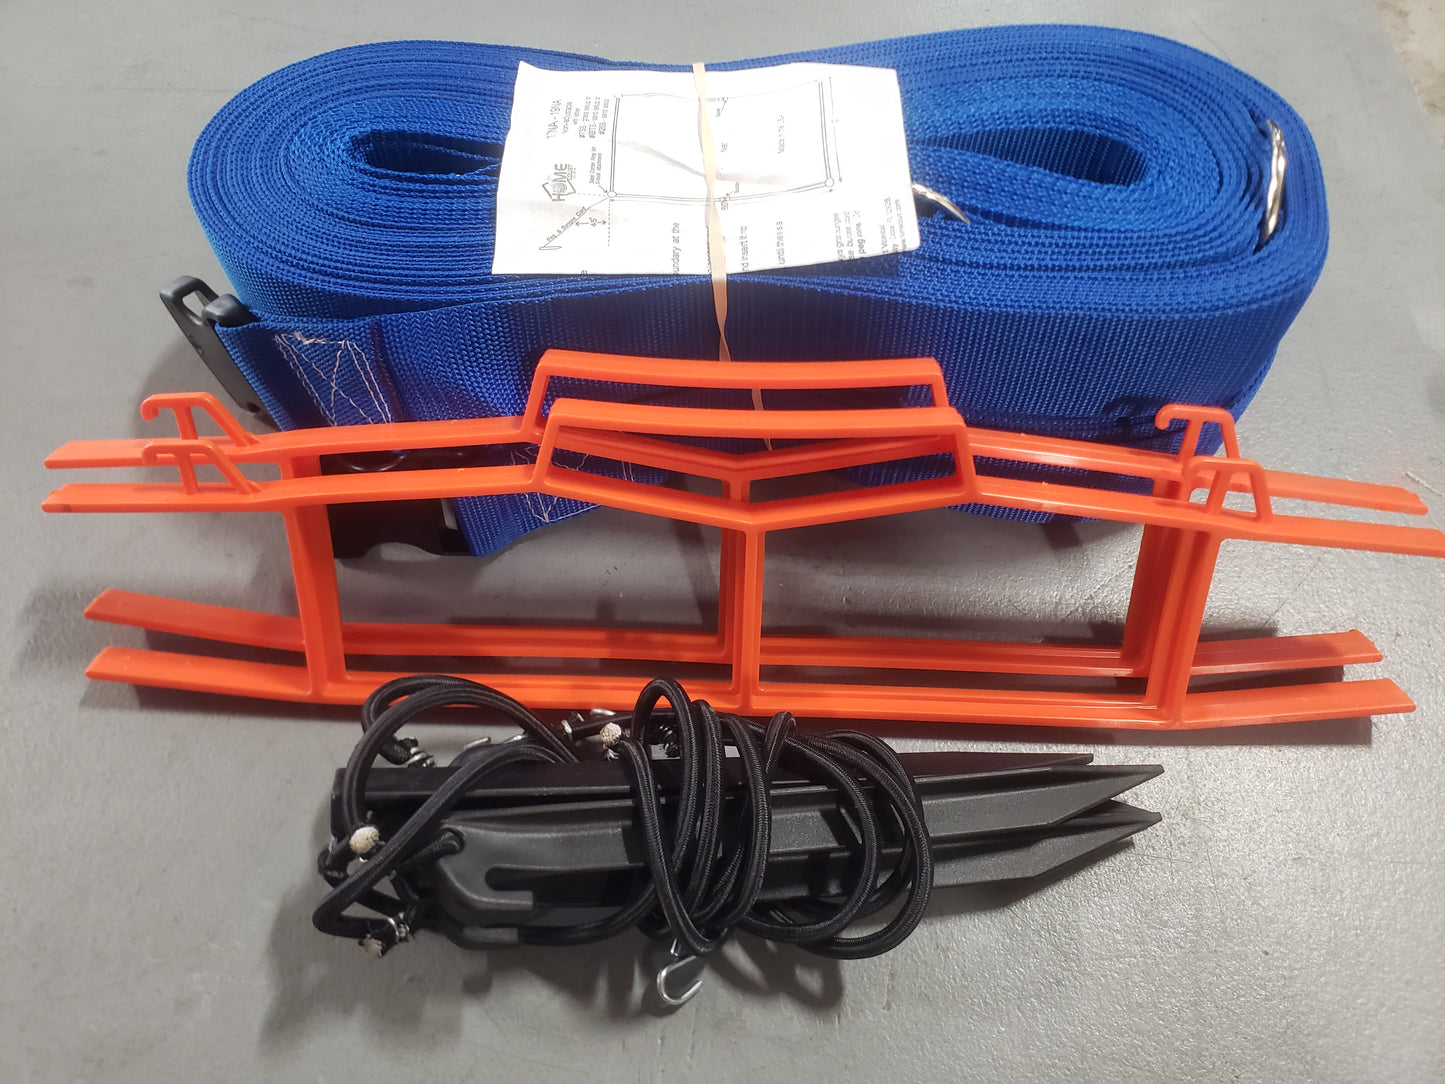 CLEARANCE ITEM #50:19NA-S-Blue (30'x60' Volleyball Boundary Non-Adjustable 2" Webbing, Sand Pegs, Blue)